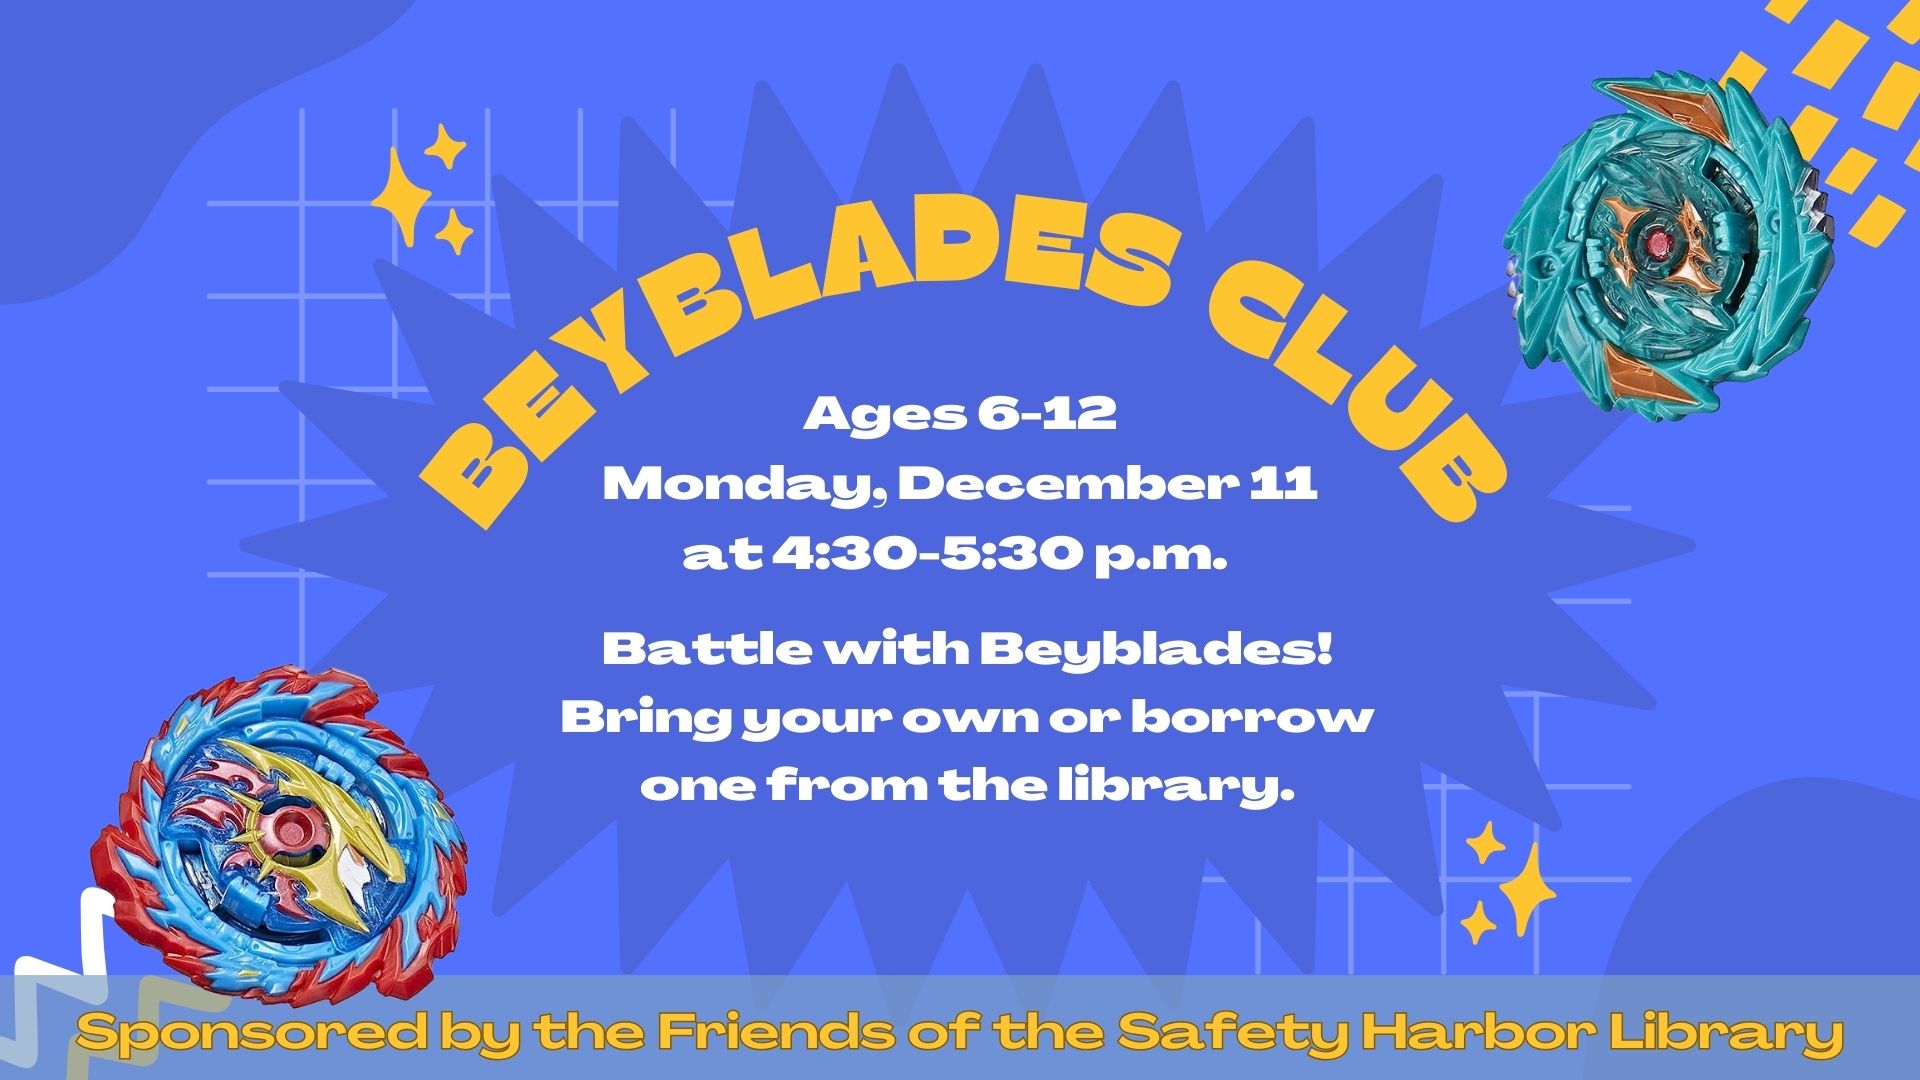 Beyblade Club. Two Beyblades pictured. 